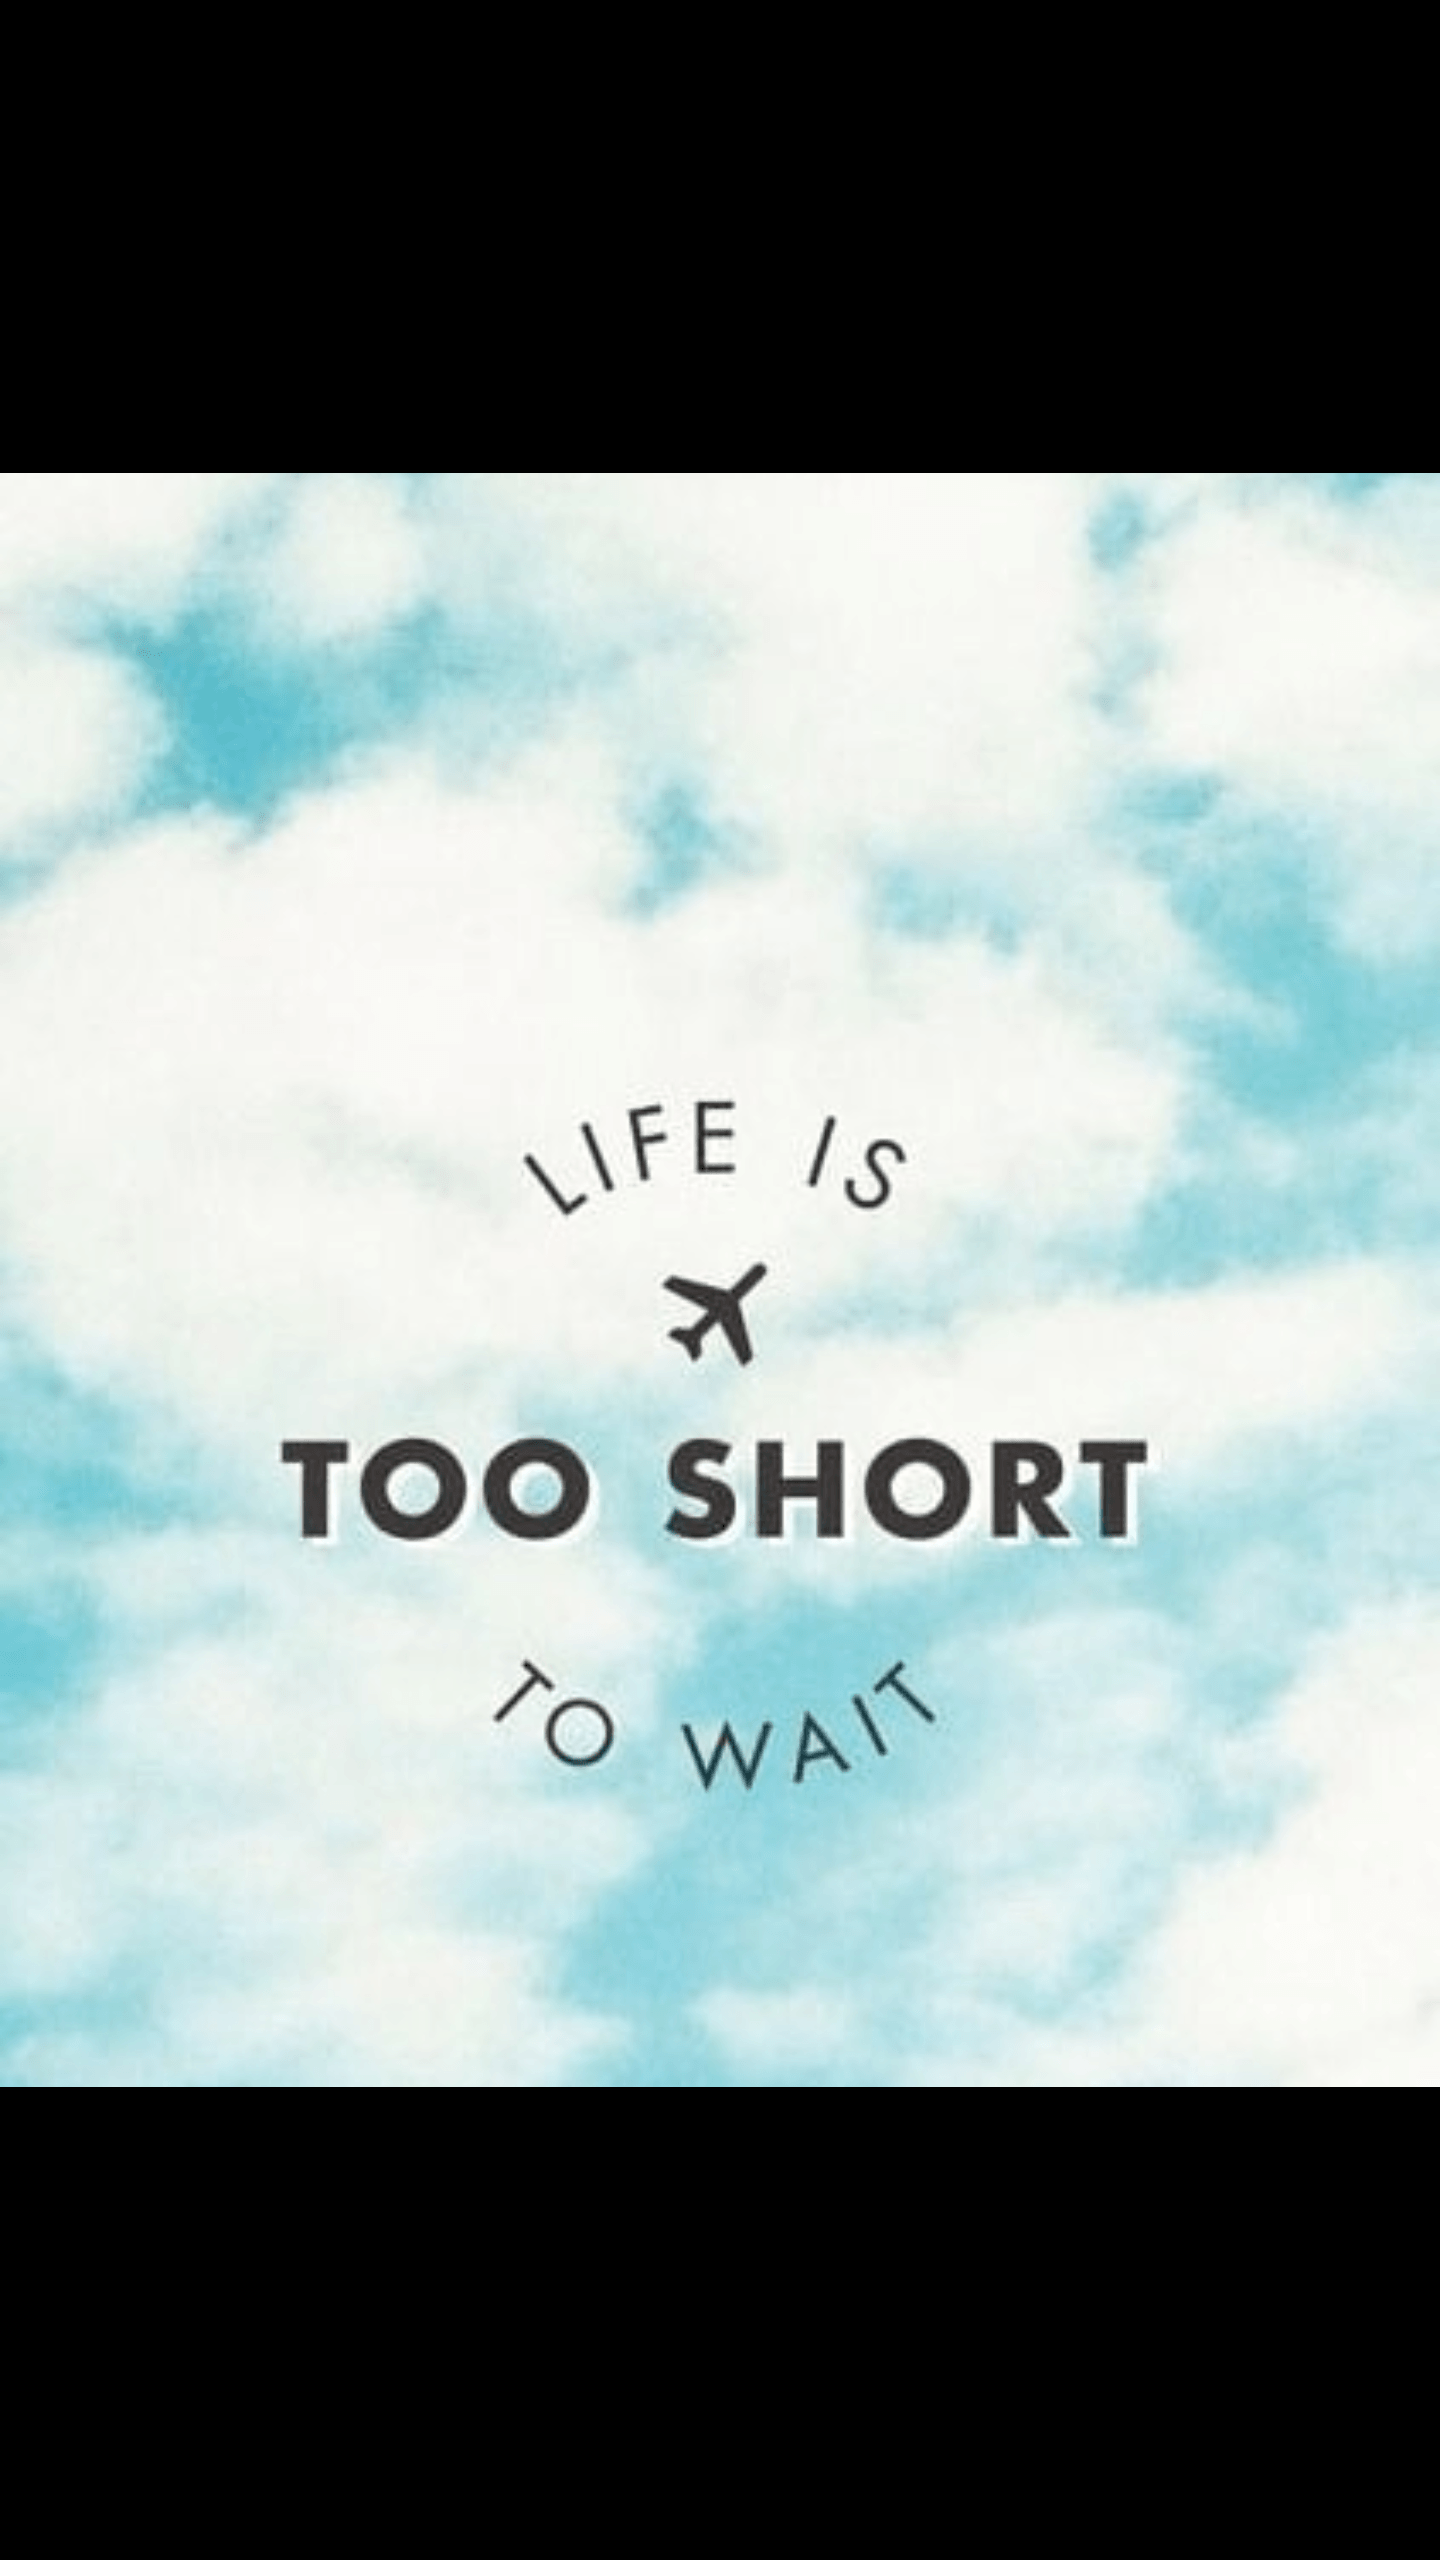 Life is too short.let's run away!. Come fly with me